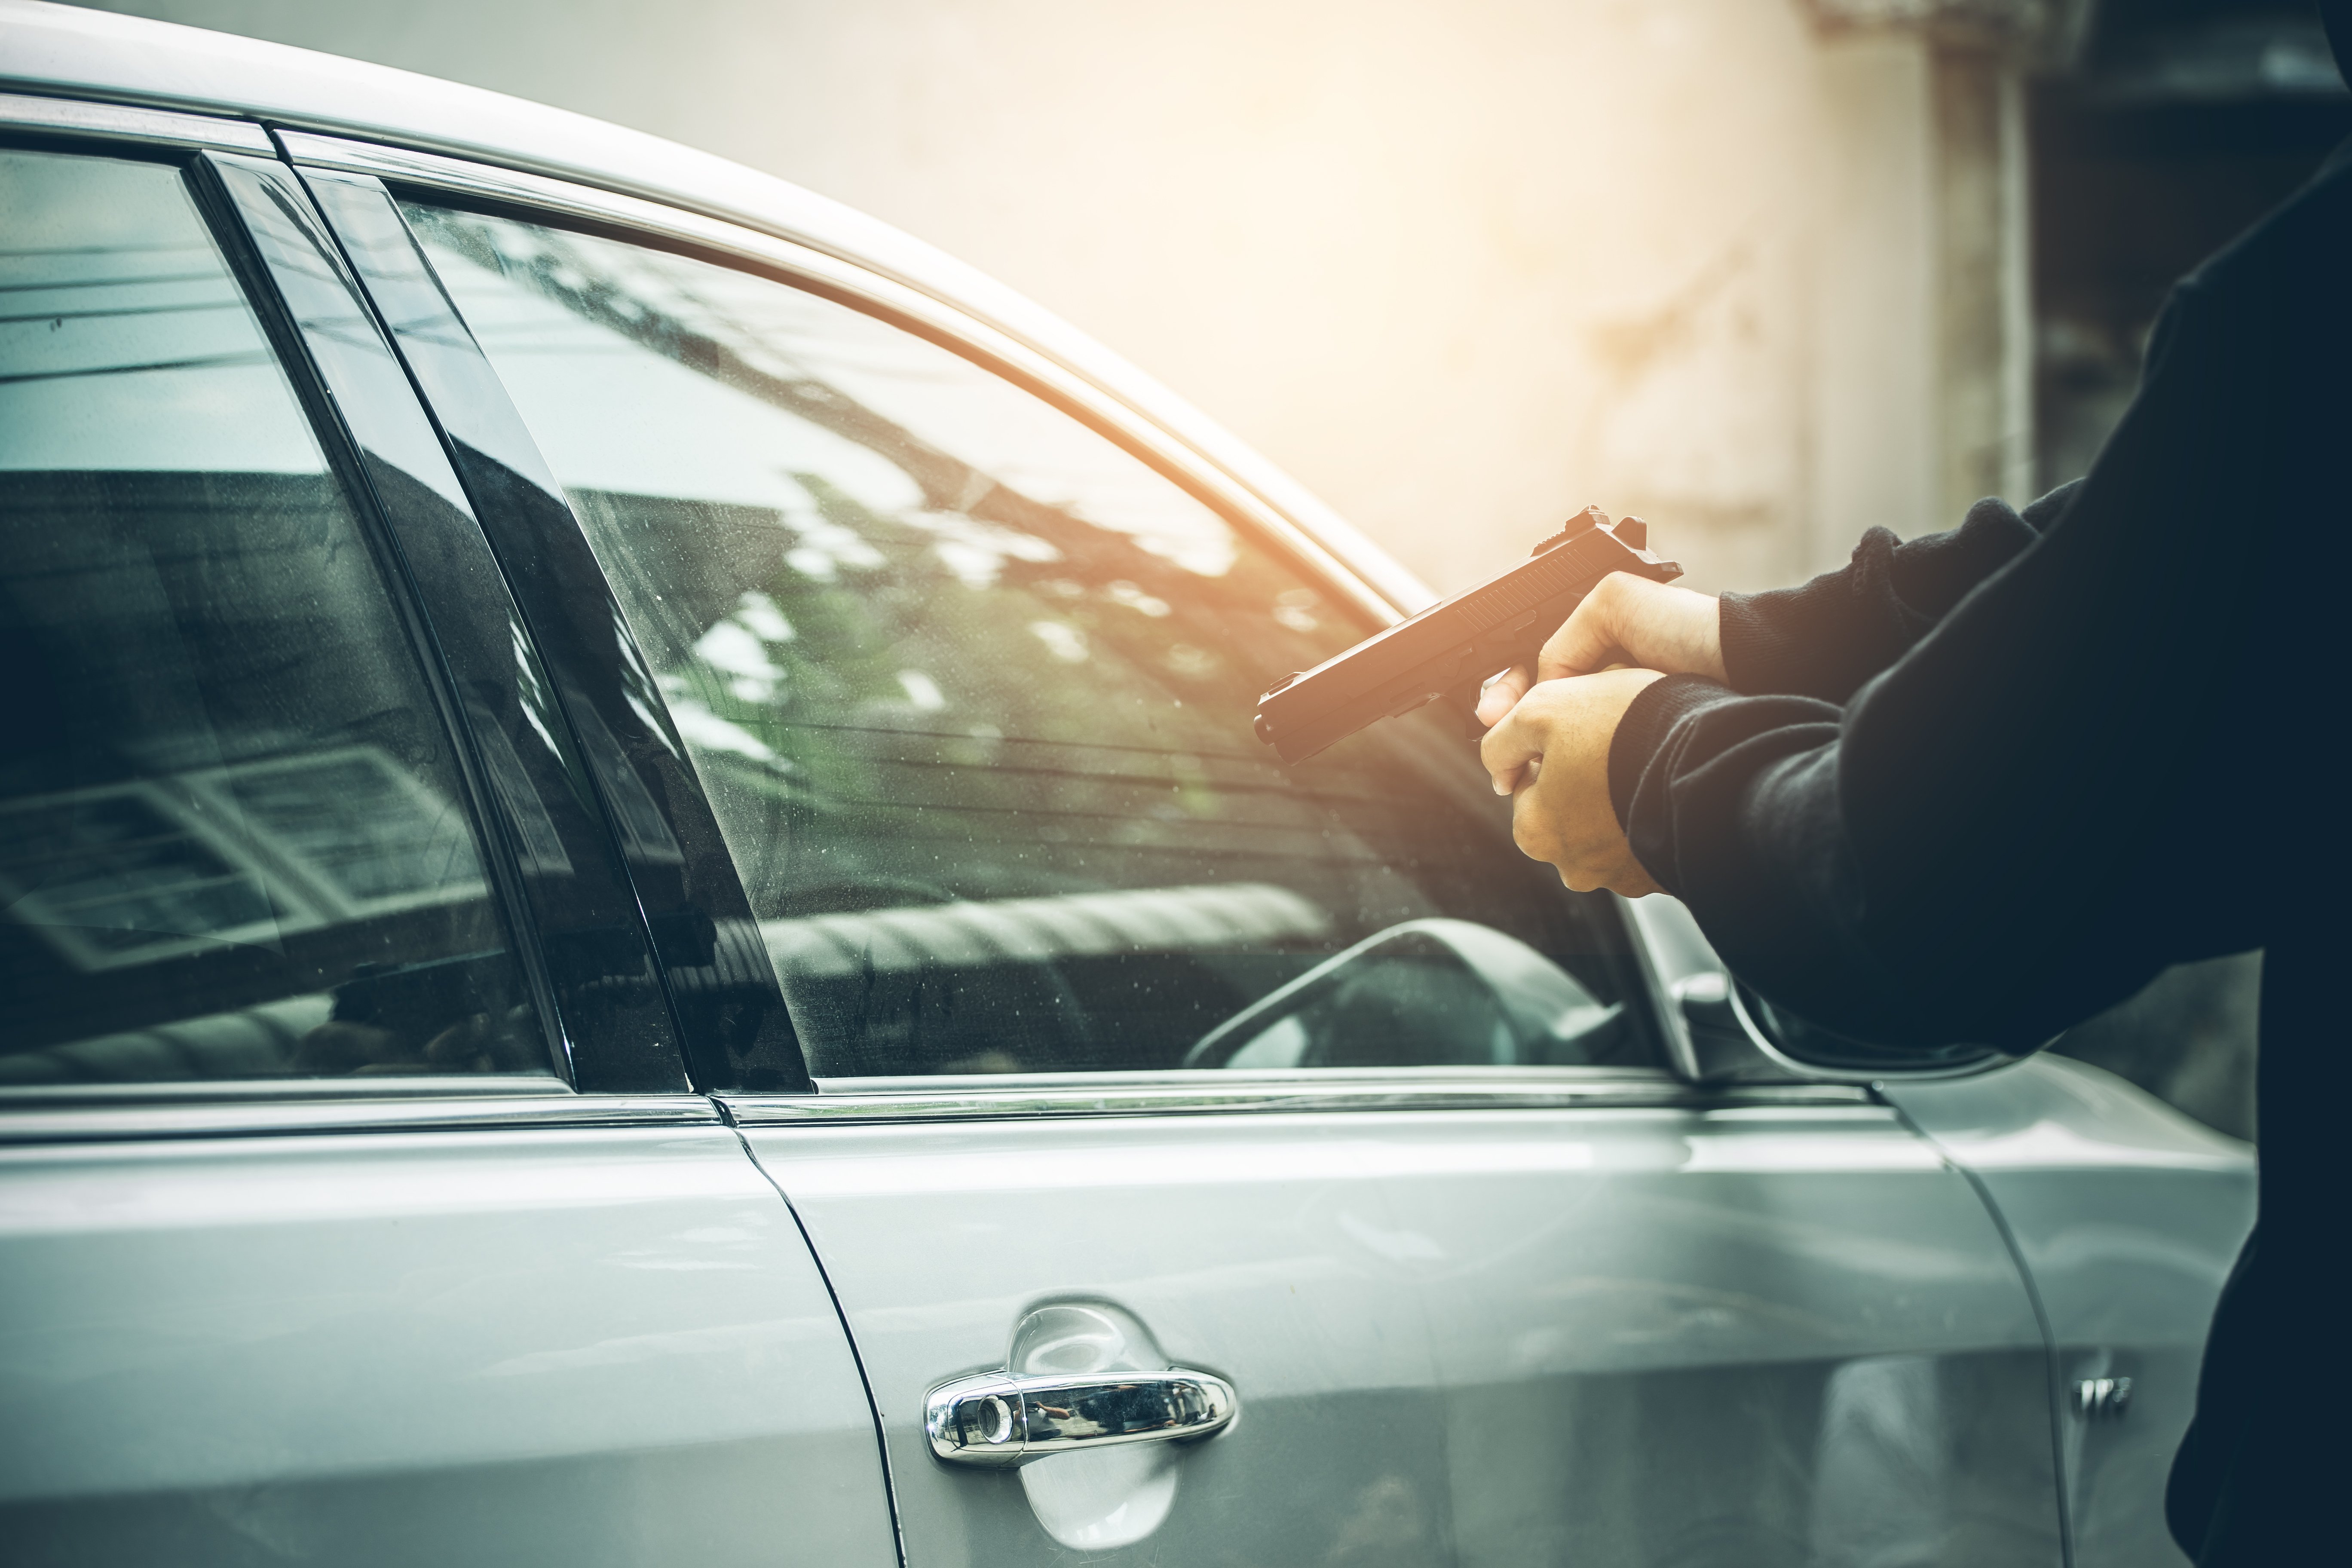 A car hijacking taking place. | Photo: Shutterstock